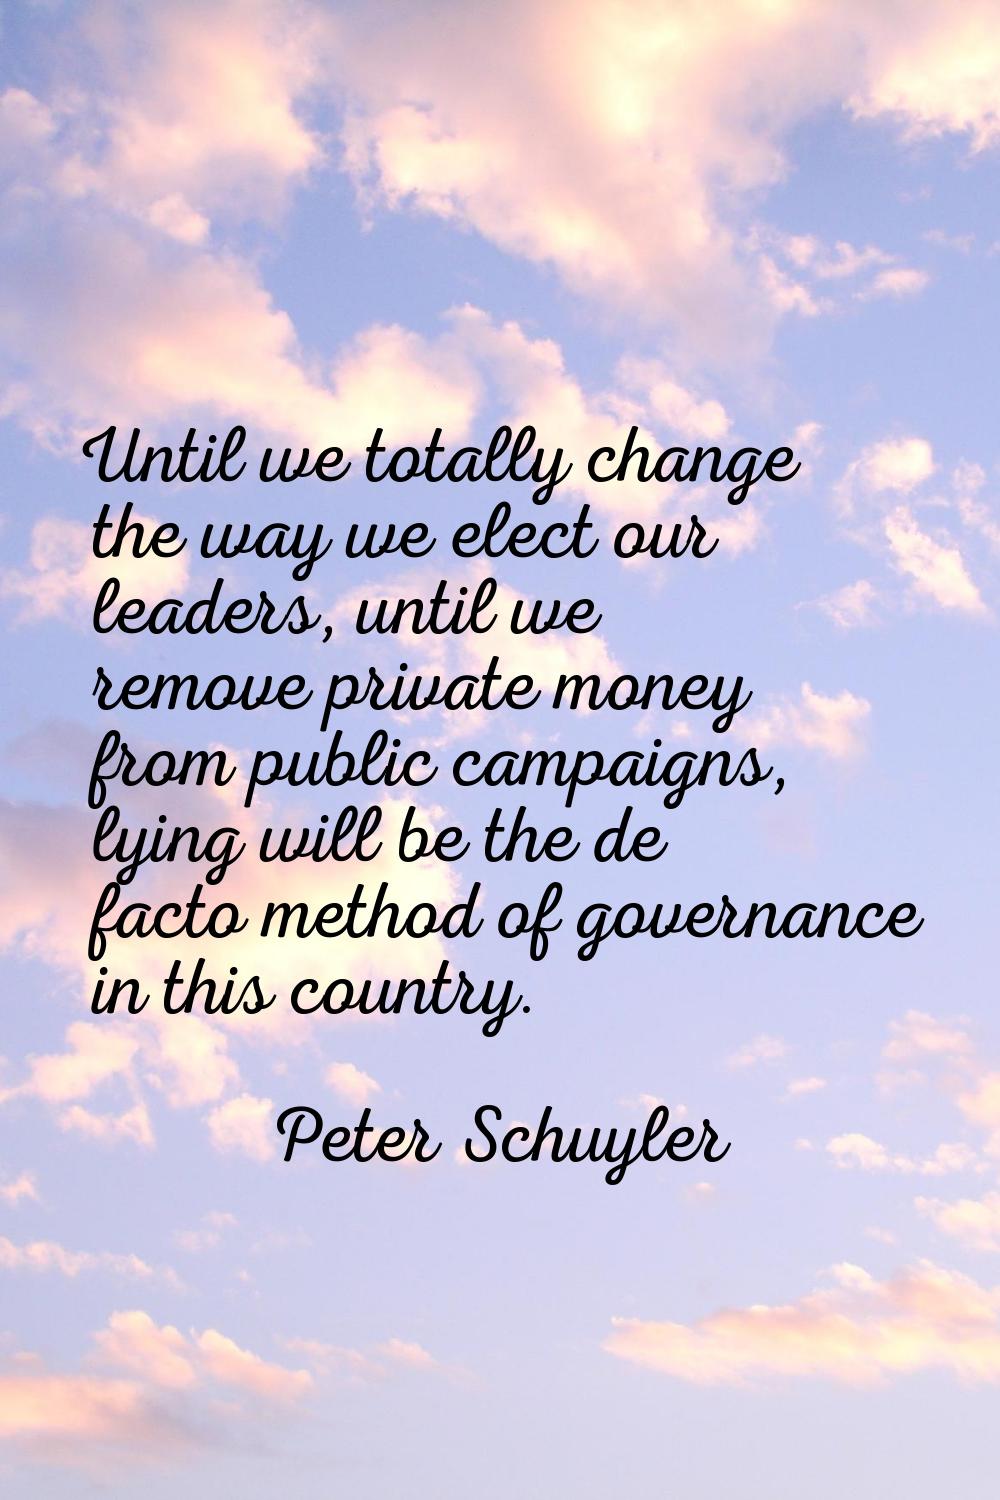 Until we totally change the way we elect our leaders, until we remove private money from public cam